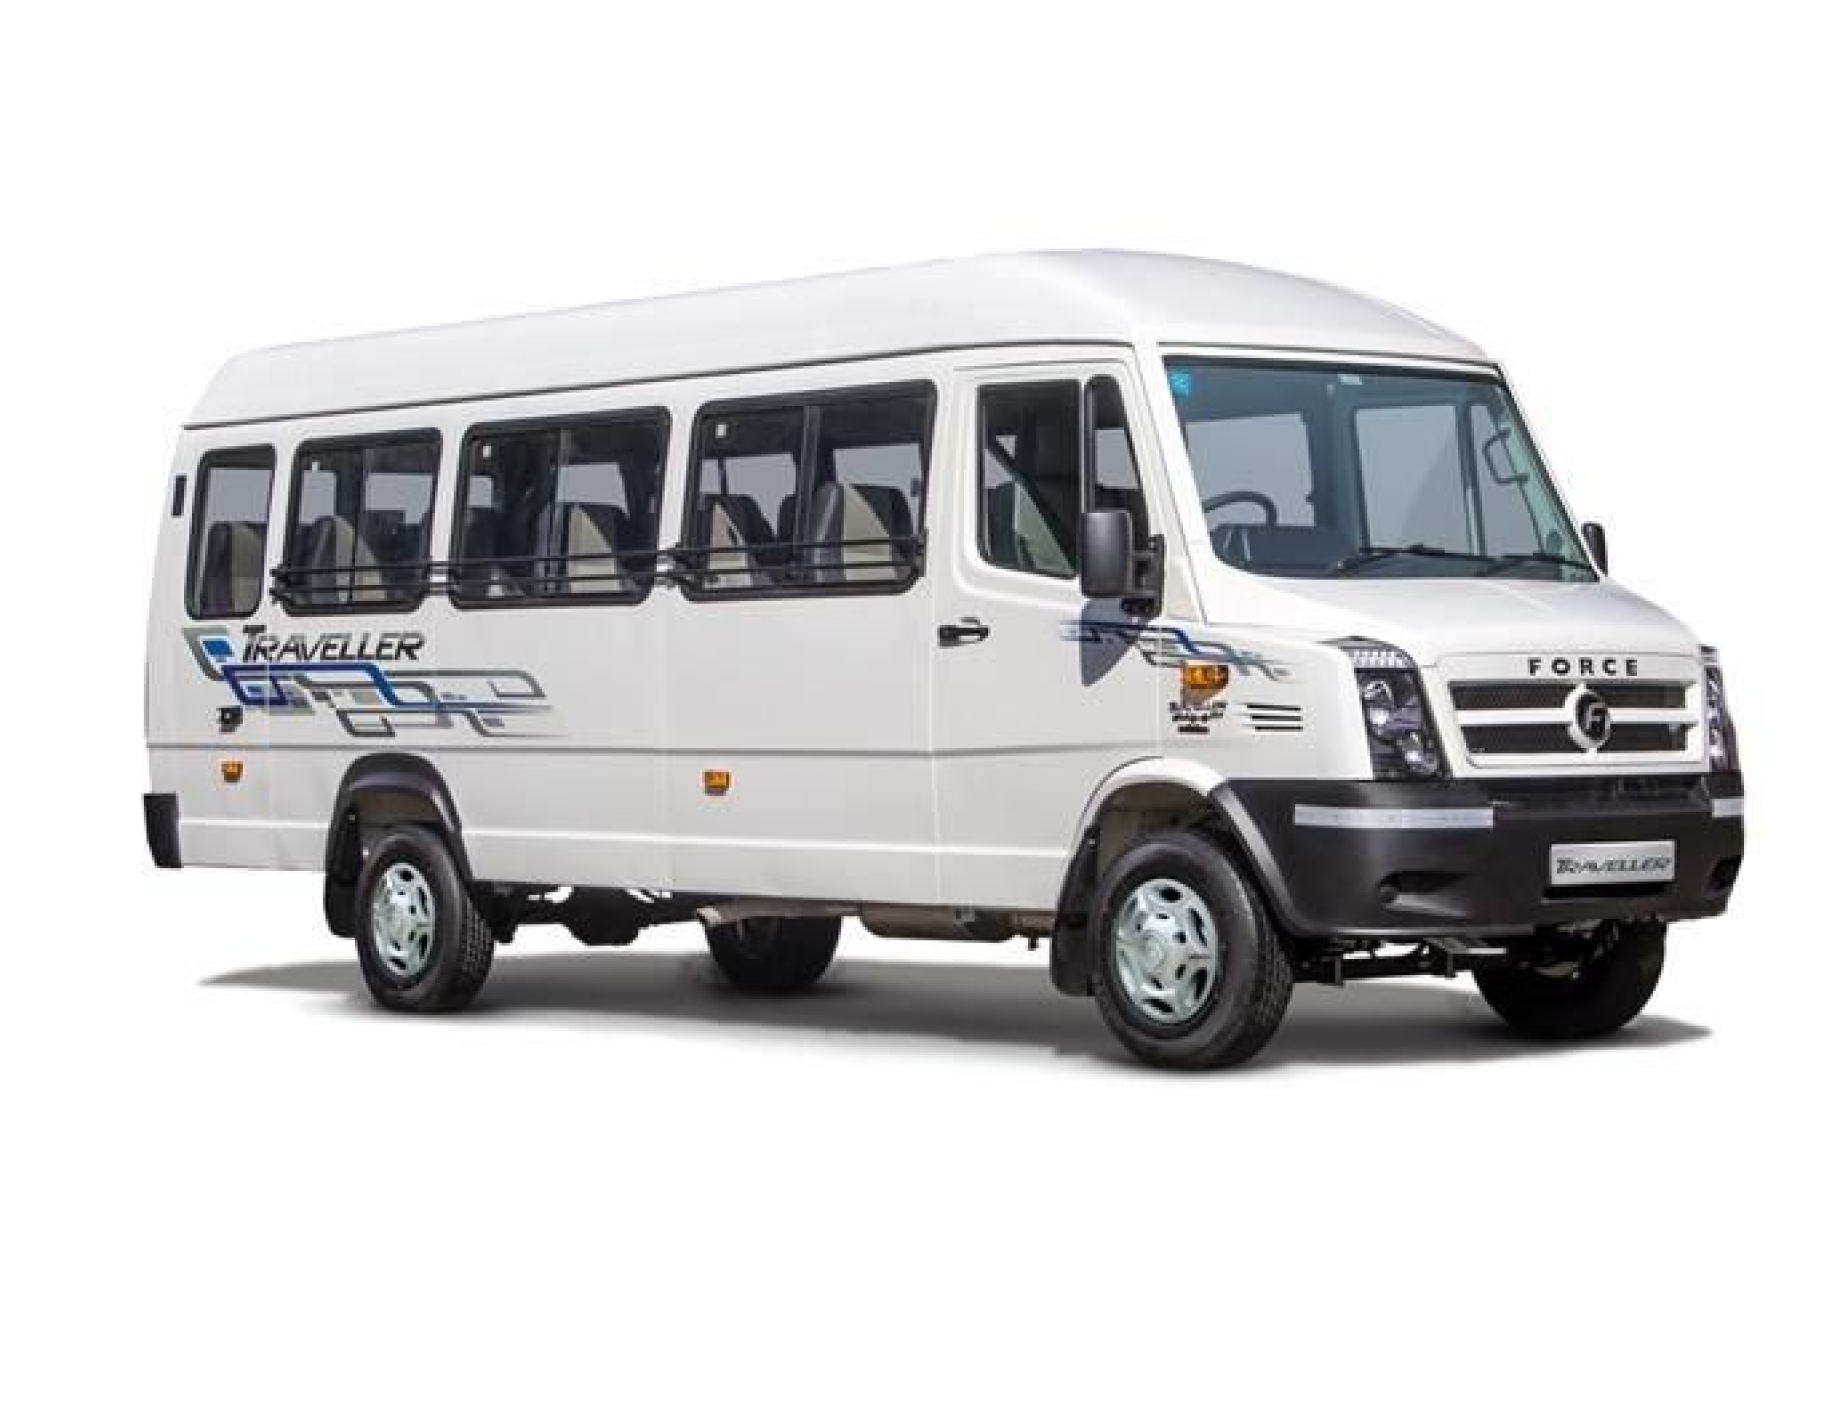 Small tempo travellers for rent for weddings, outstation trips, family outings.